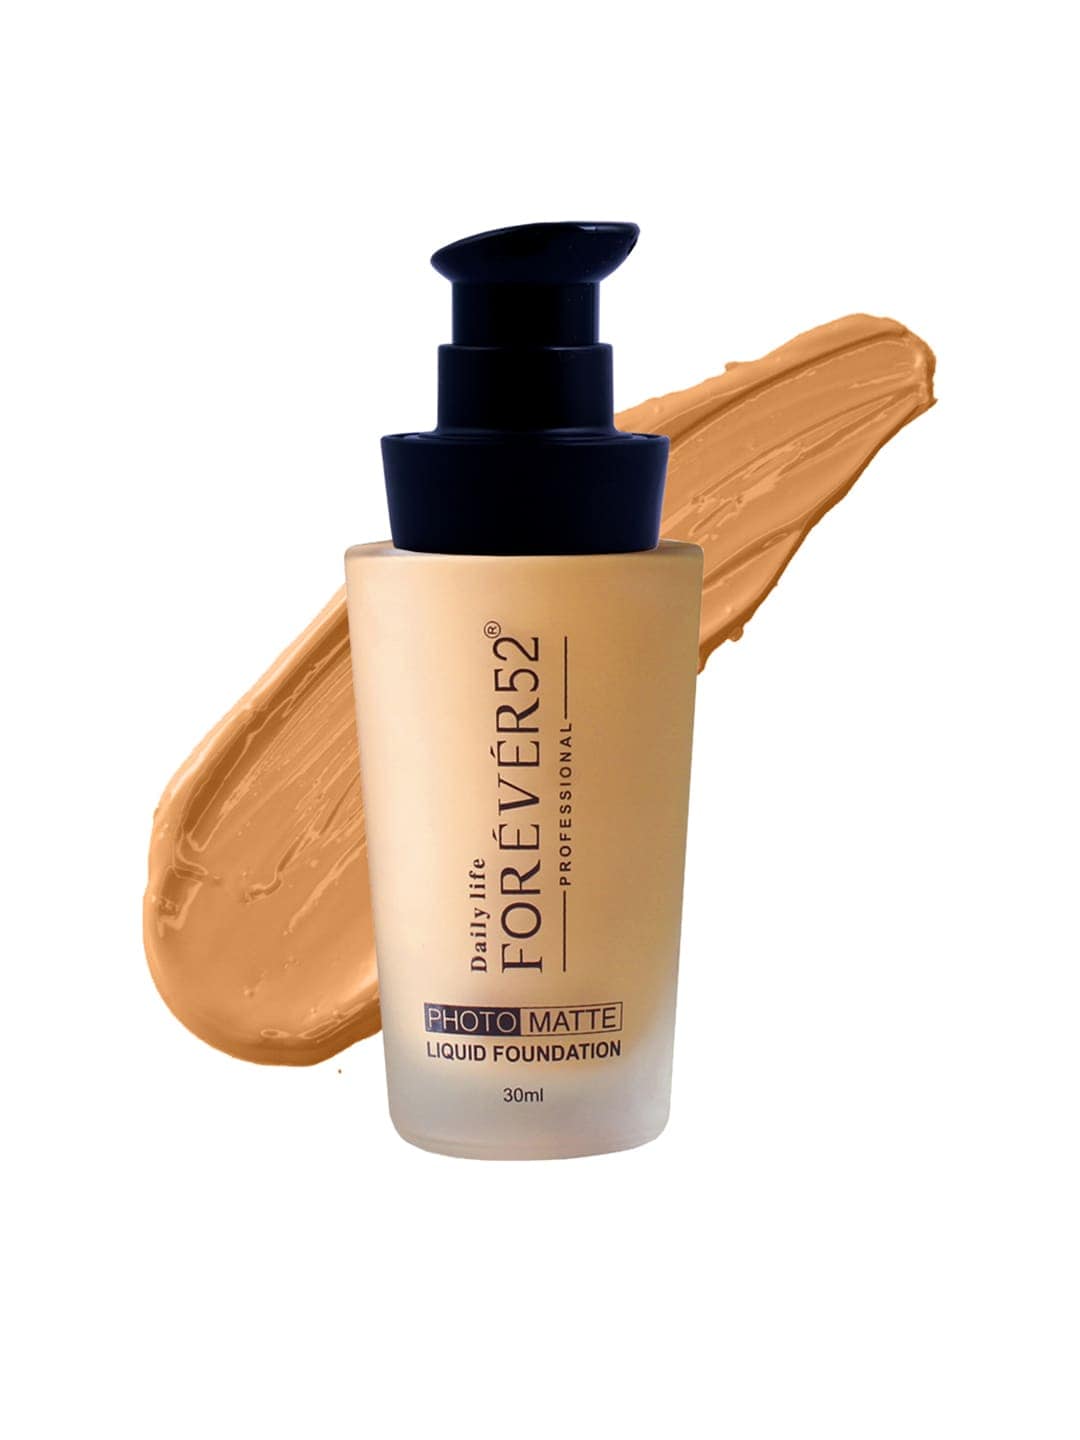 Daily Life Forever52 Beige Photo Matte Liquid Foundation- Deep Bronze  30 ml Price in India